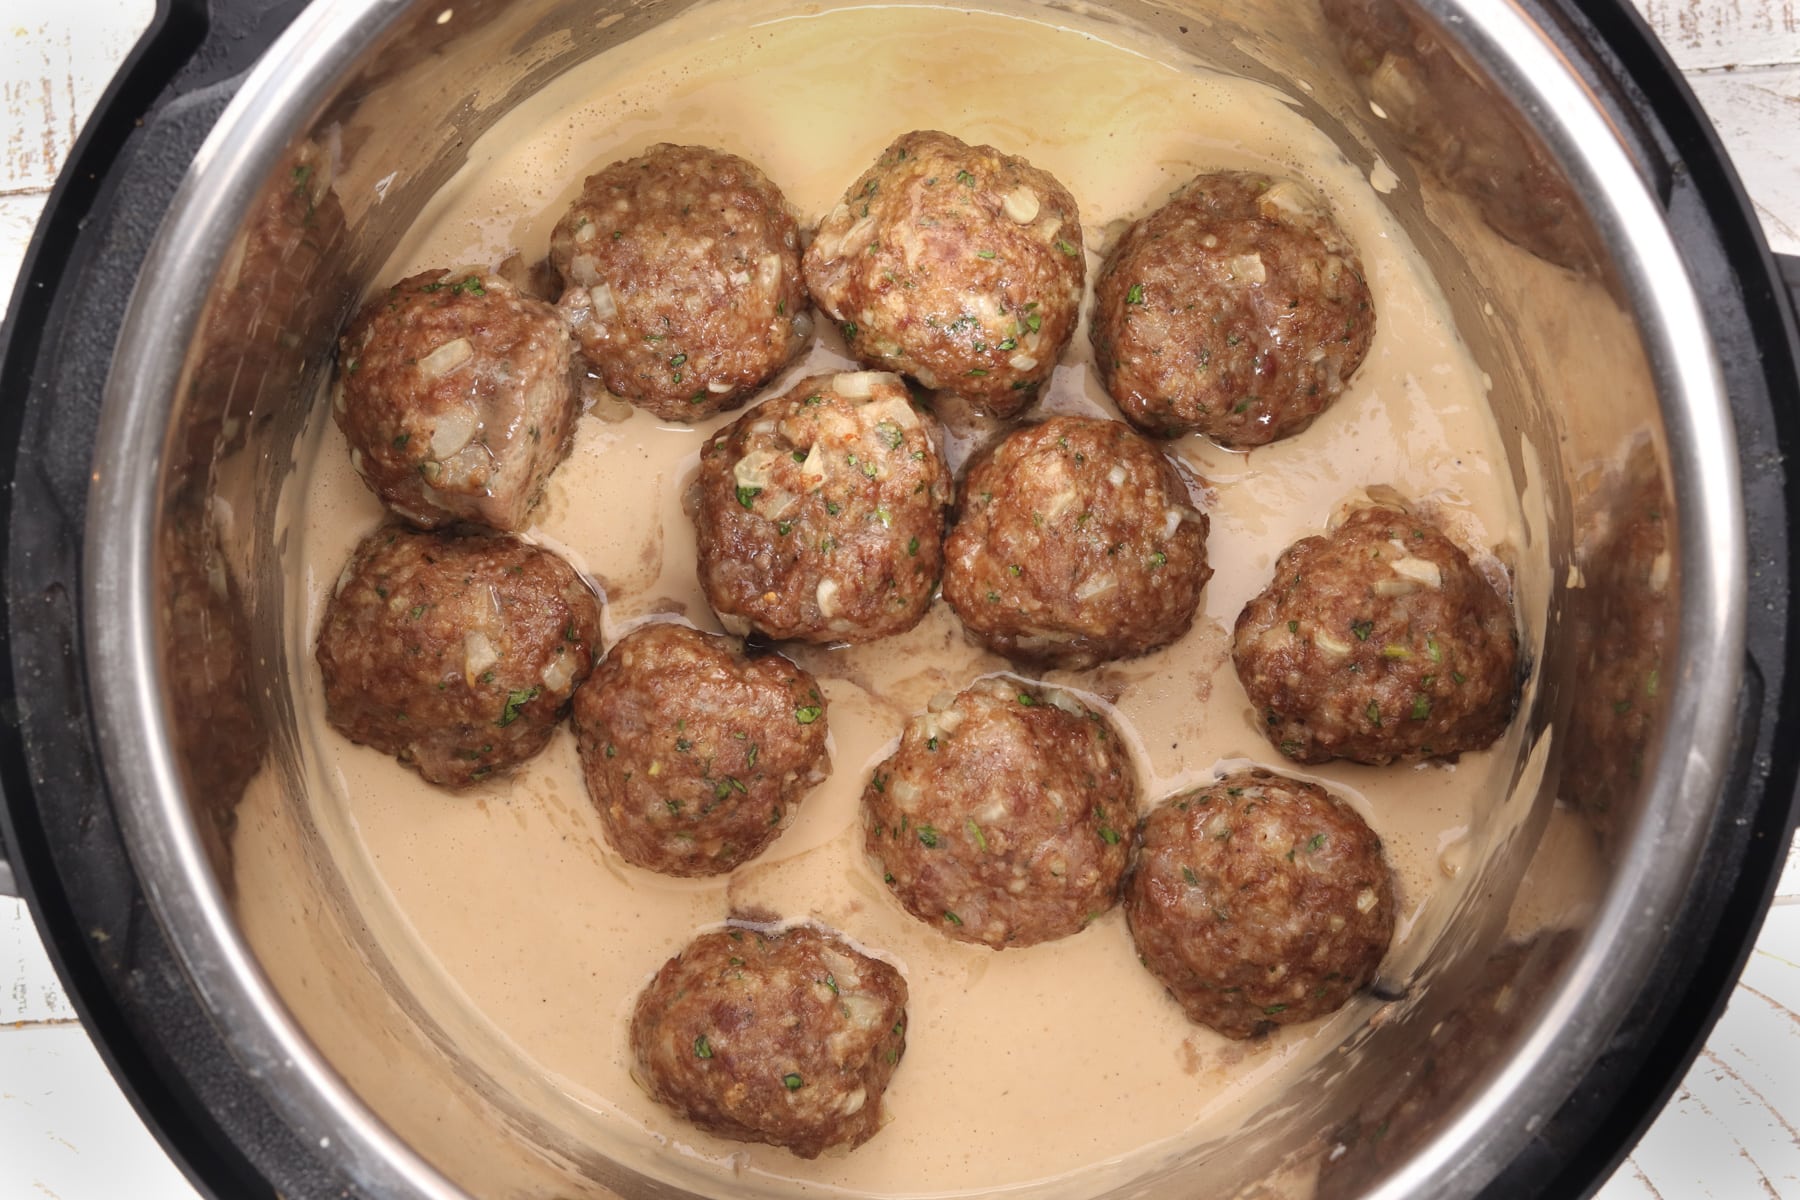 Step 6 - Instant Pot Swedish Meatballs. Place cooked meatball back into the IP.